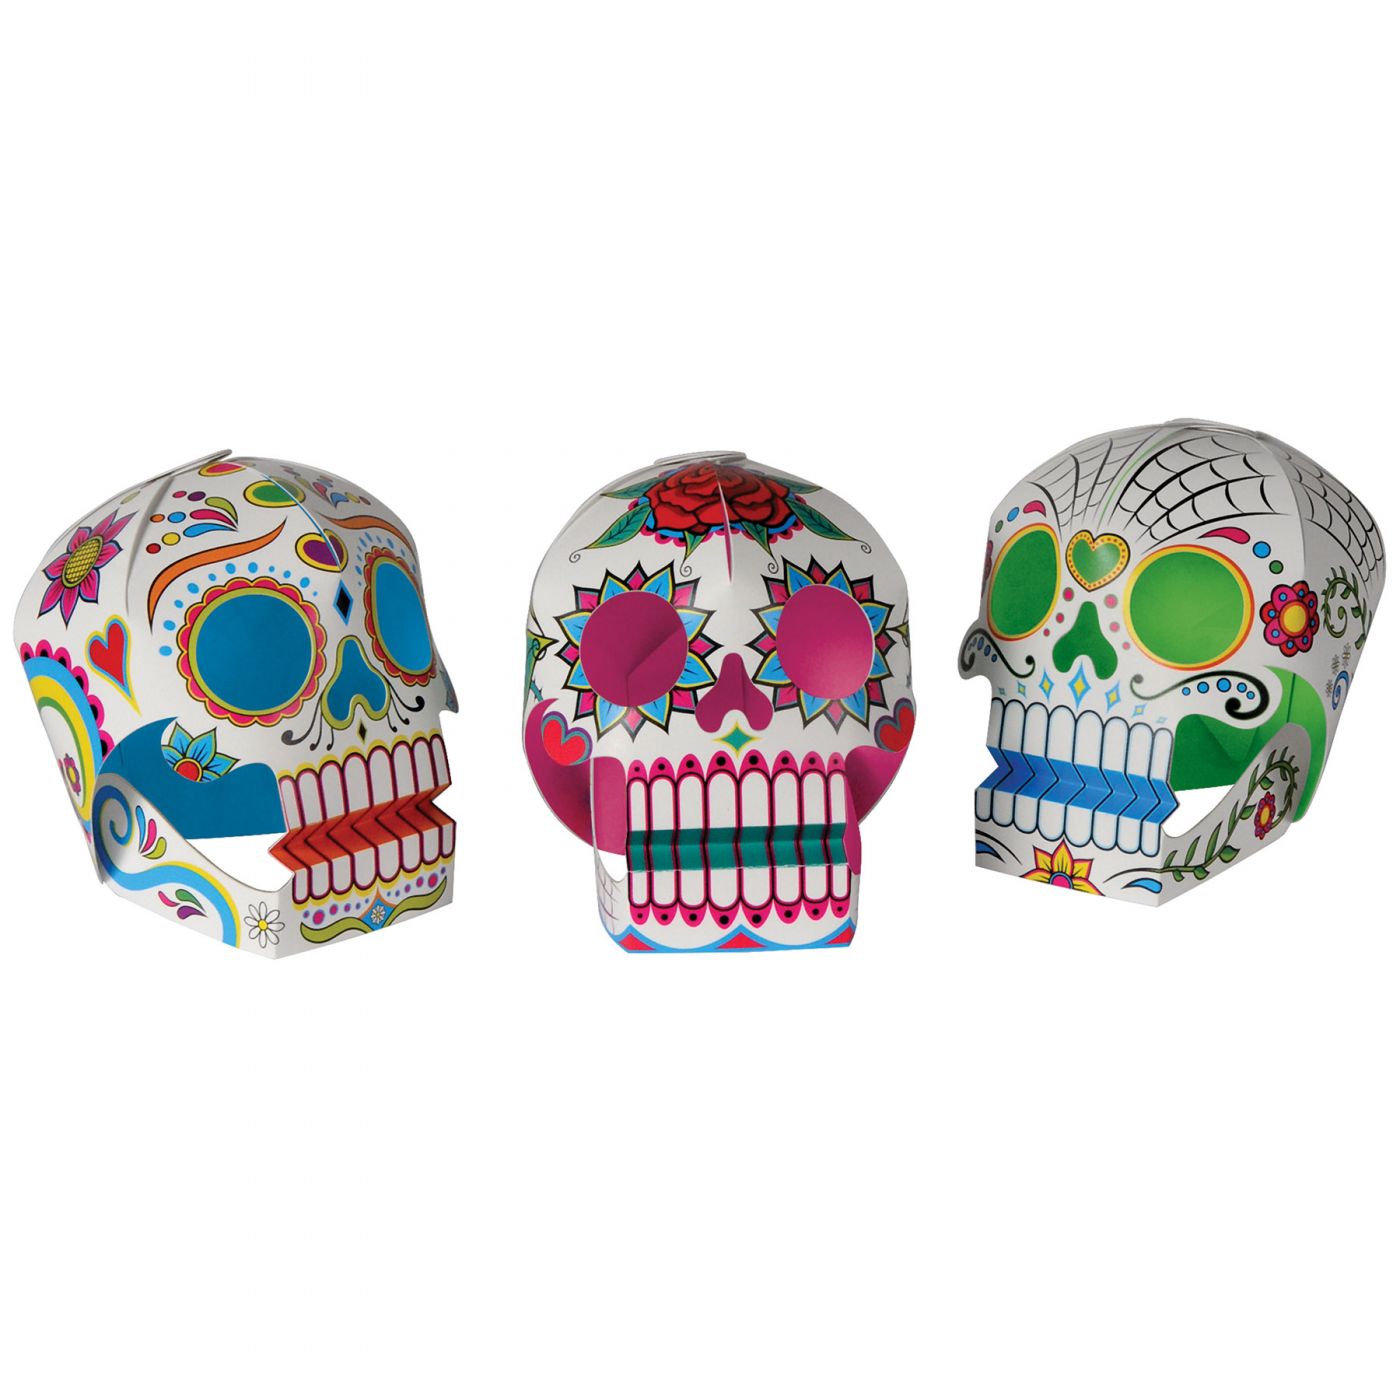 Image of 3-D Dead of the Dead Sugar Skull Centerpieces (12)